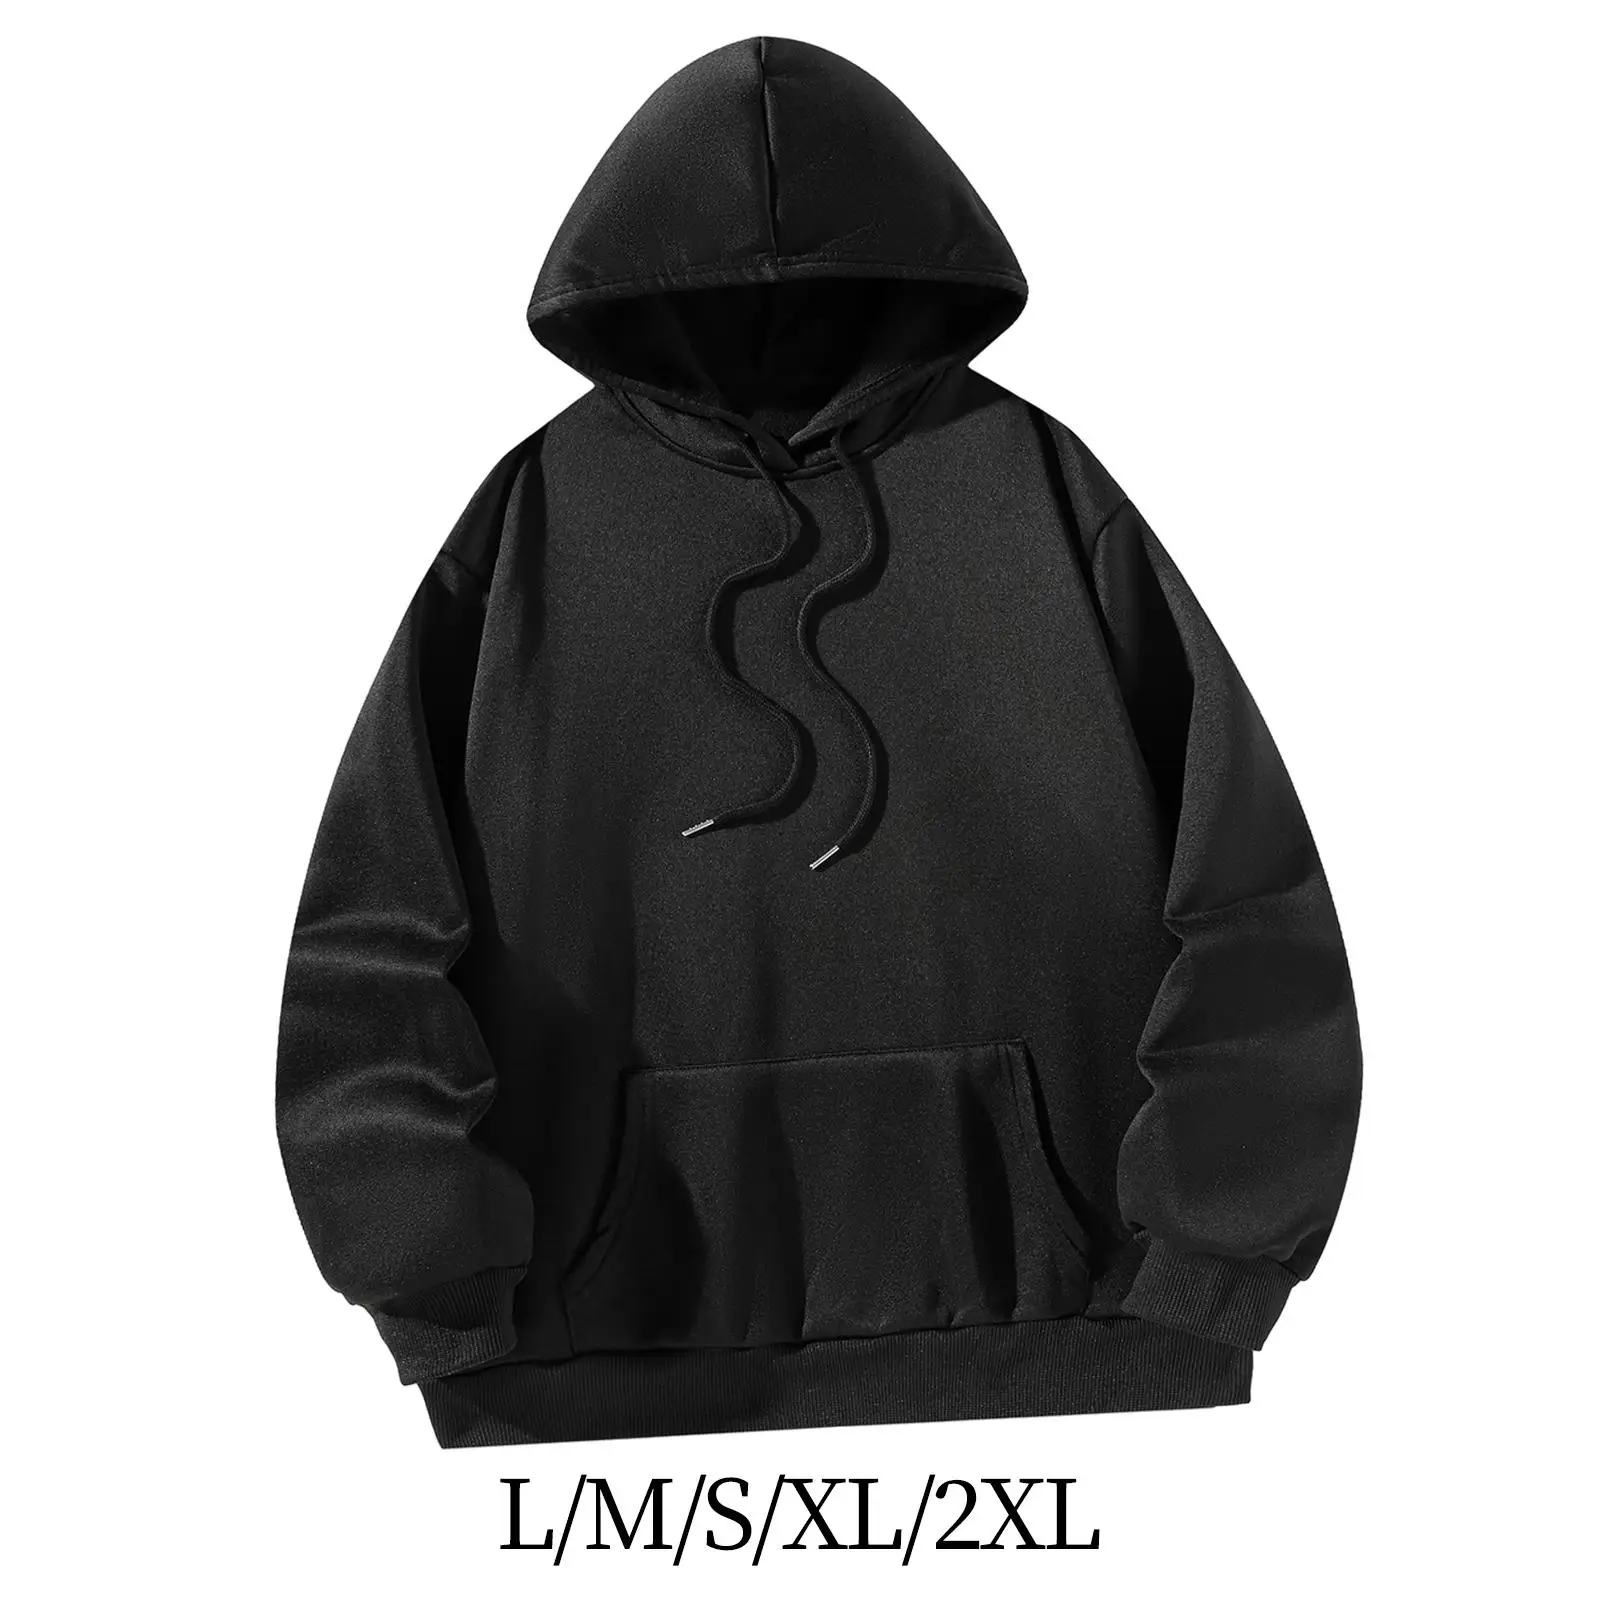 Womens Hoodie Sweatshirt Printed Letter Gift Comfortable Drawstring Pullover Hoodie for Walking Autumn Street Backpacking Sports